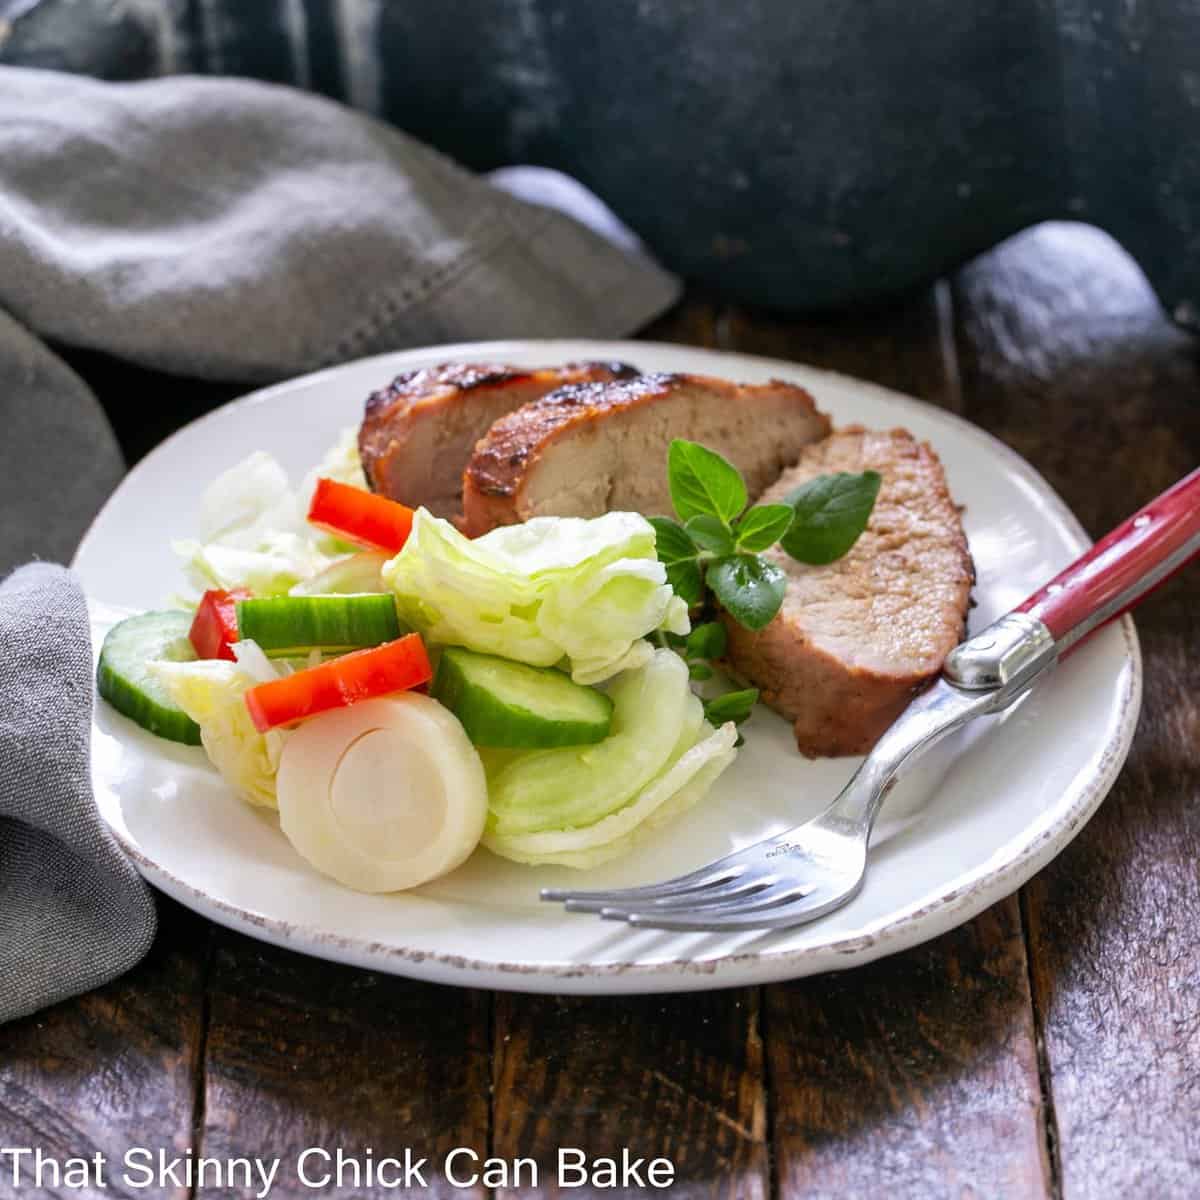 25 Delicious Salt Pork Recipes to Try Today - Drizzle Me Skinny!